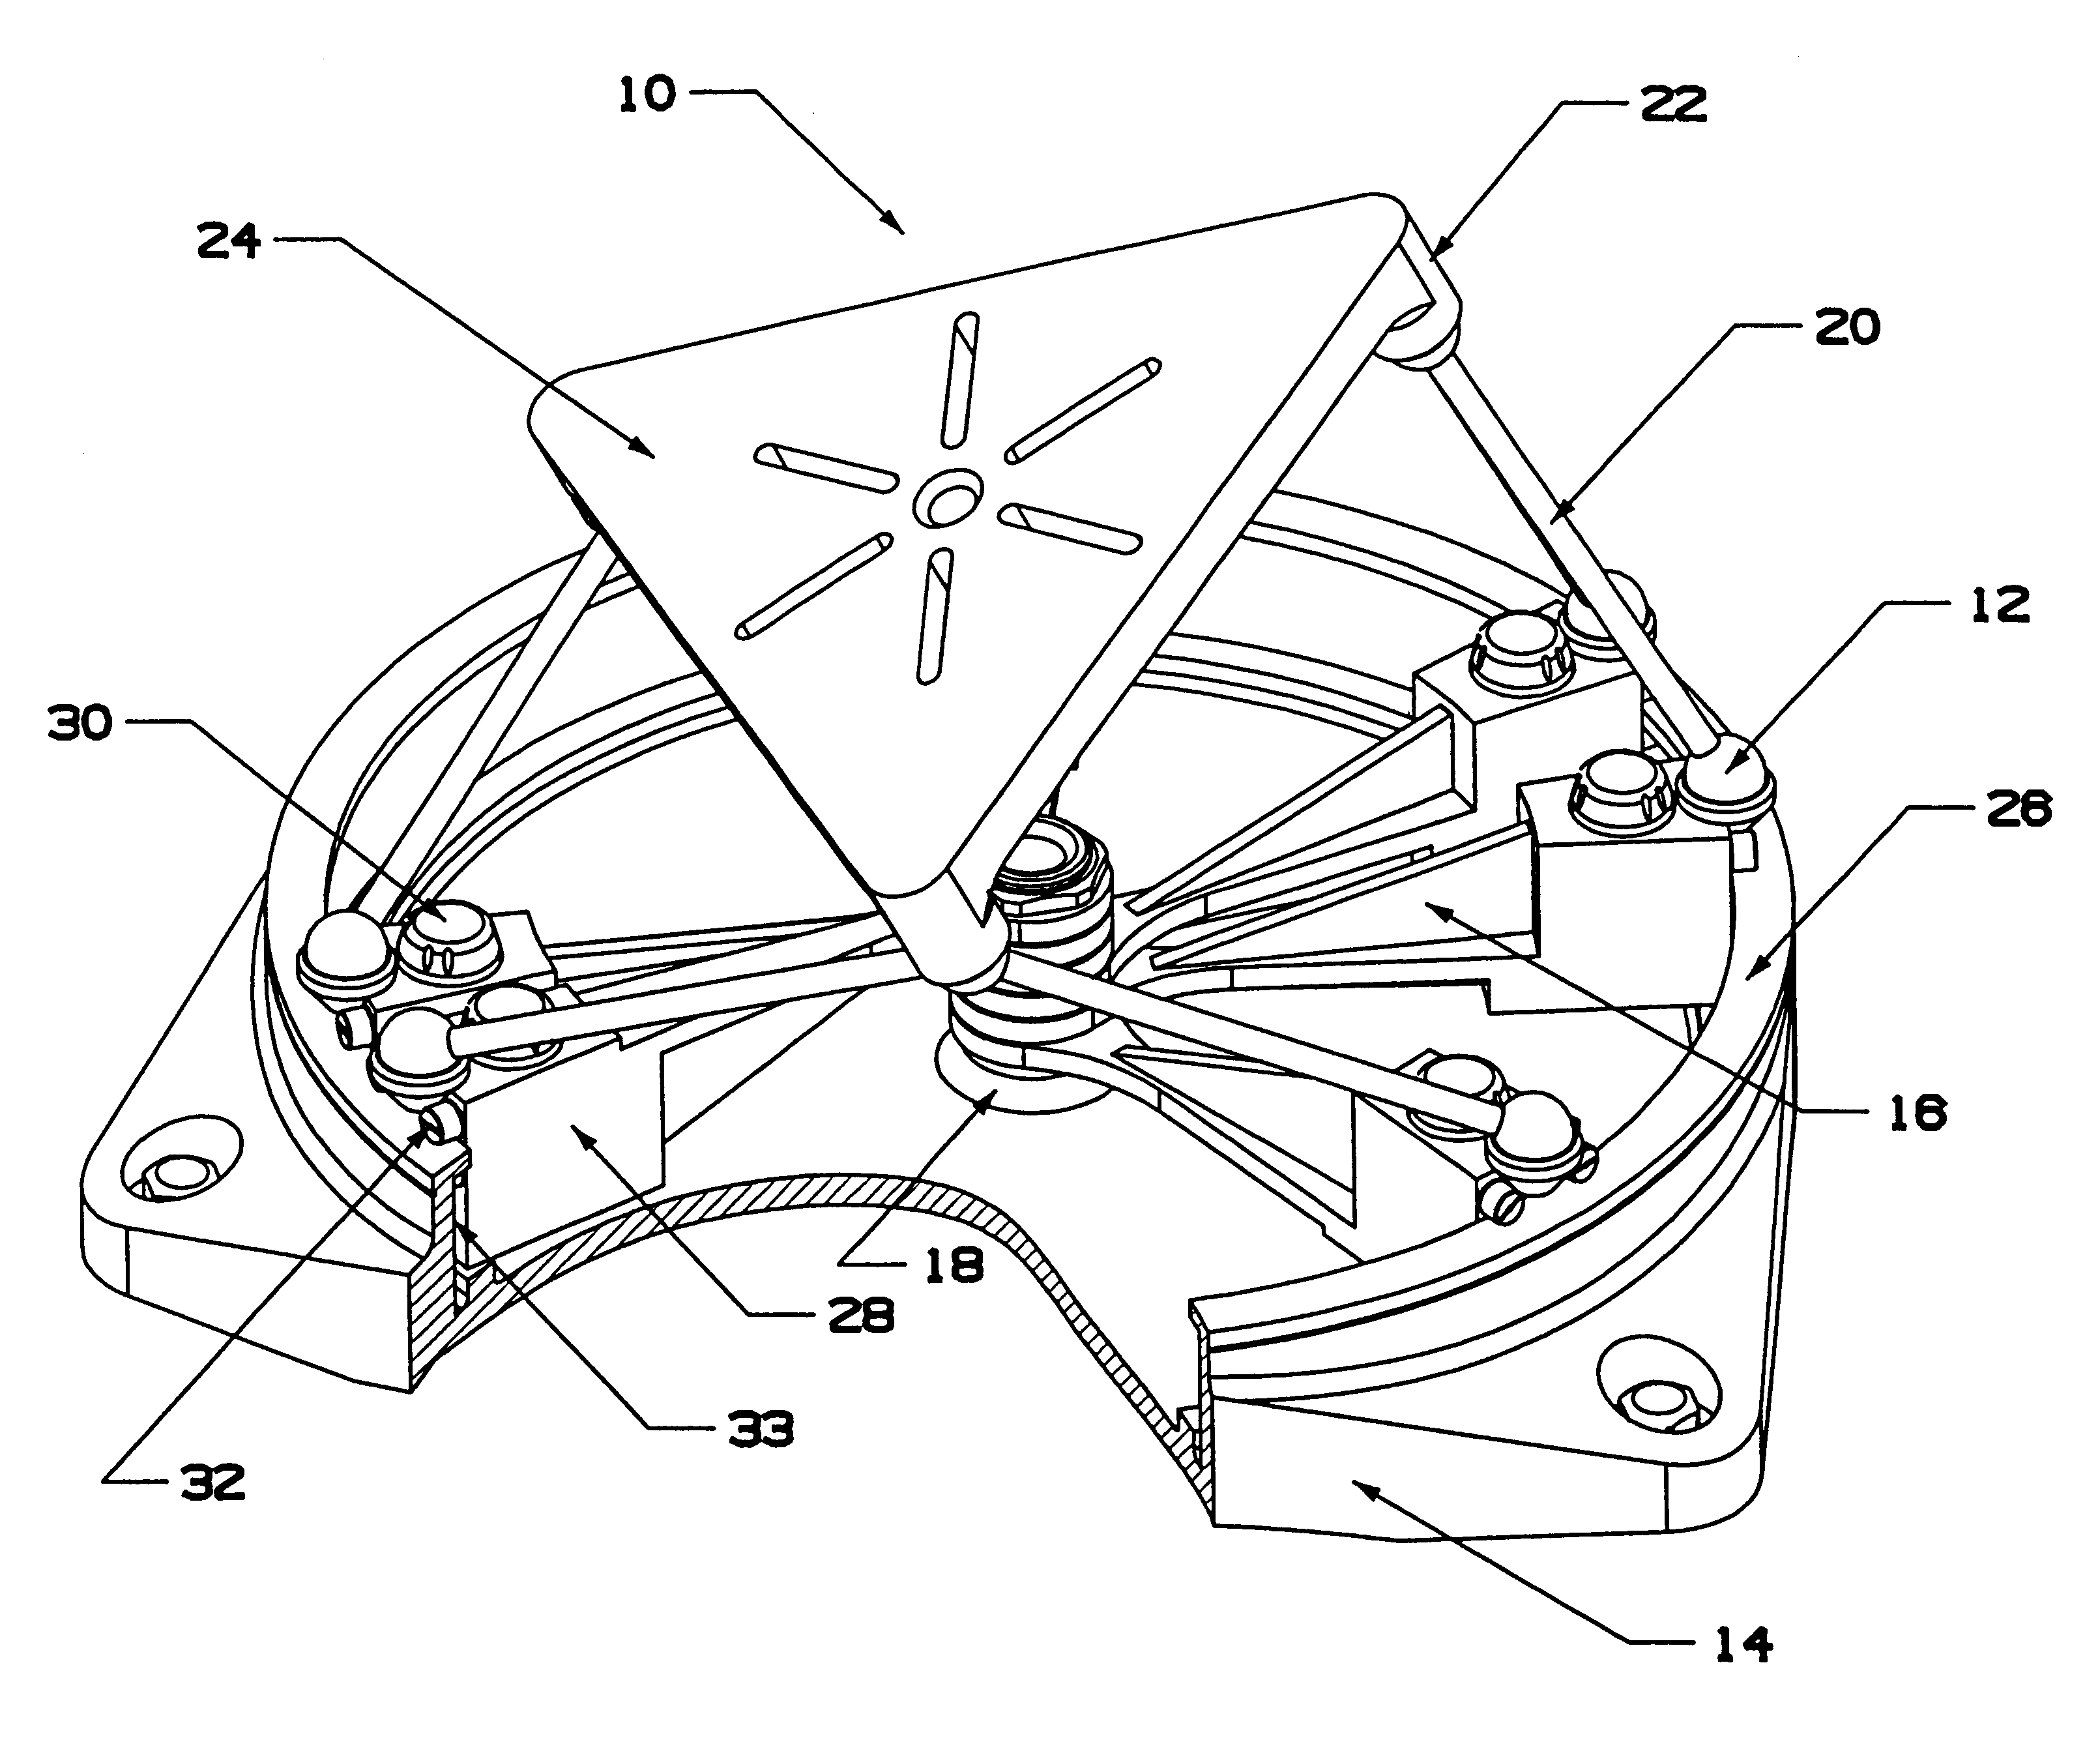 Systems and methods employing a rotary track for machining and manufacturing